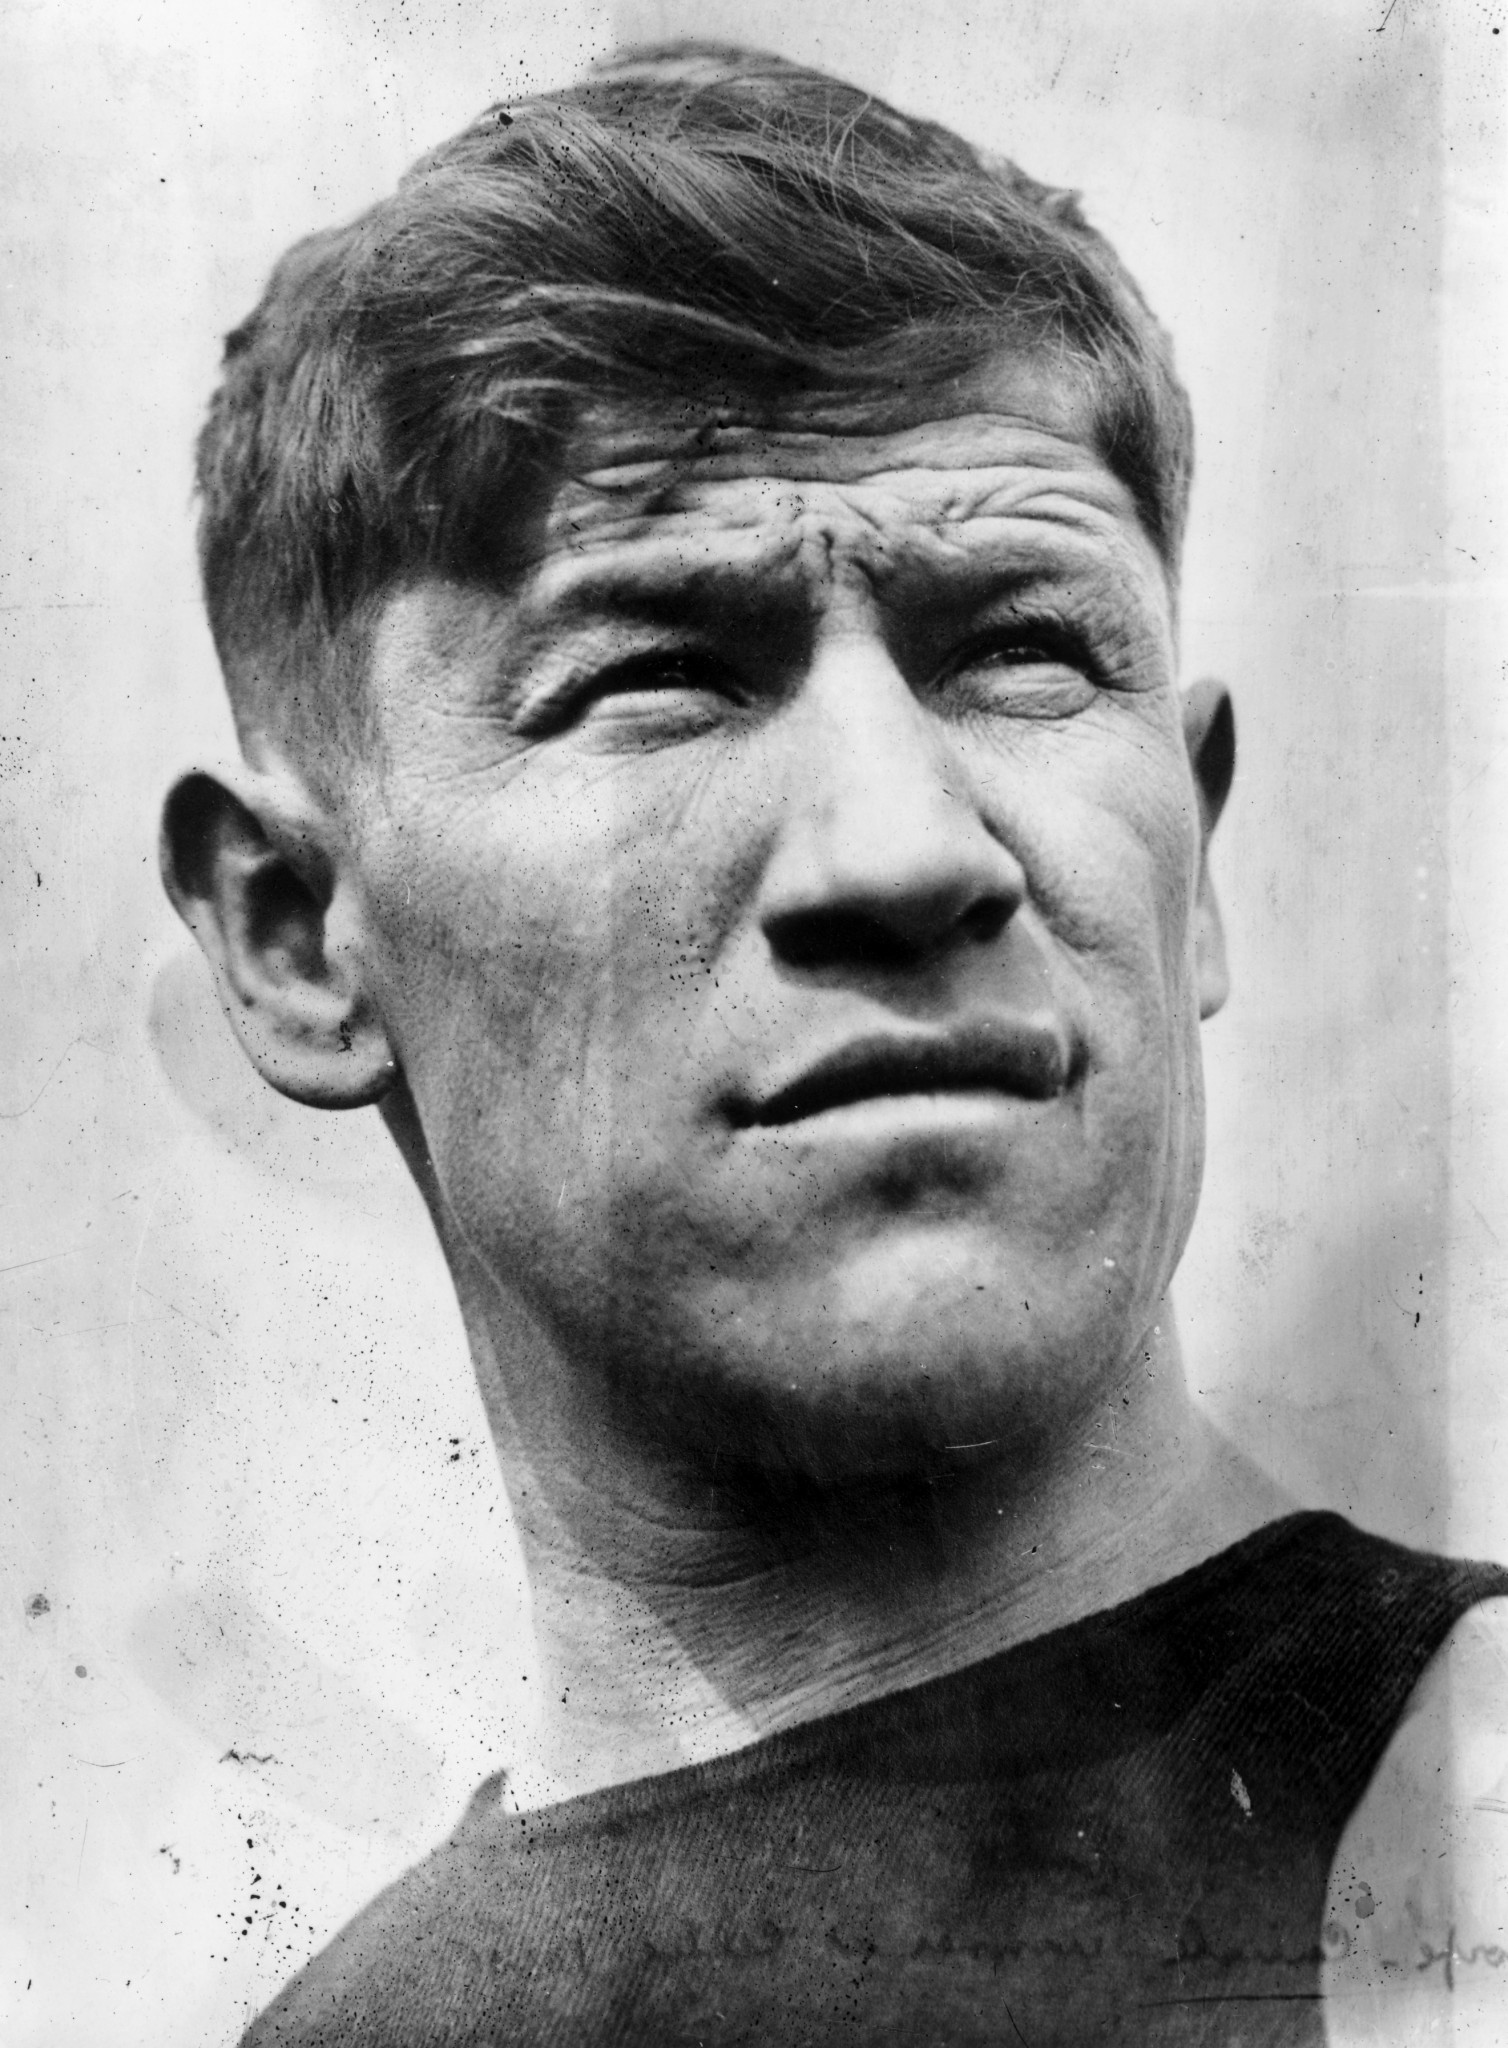 Multi-talented Jim Thorpe, double Olympic champion in 1912, was inducted into the Pro Football Hall of Fame in 1963 ©Getty Images